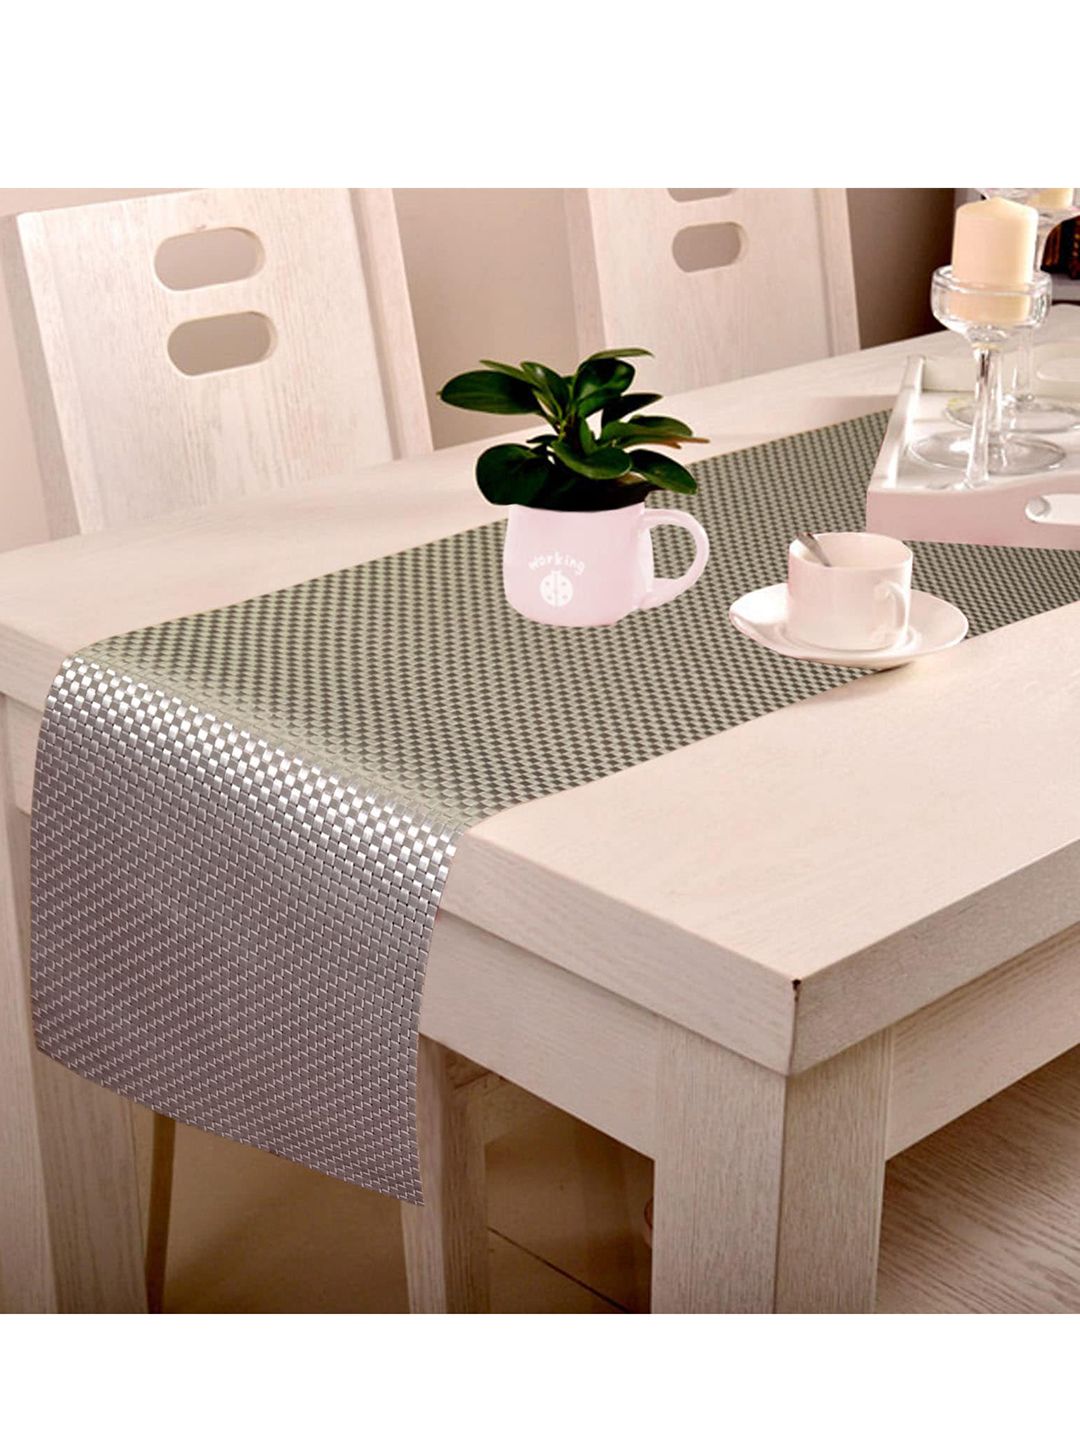 Lushomes Silver-Toned Self-Design Waterproof Table Runner Price in India